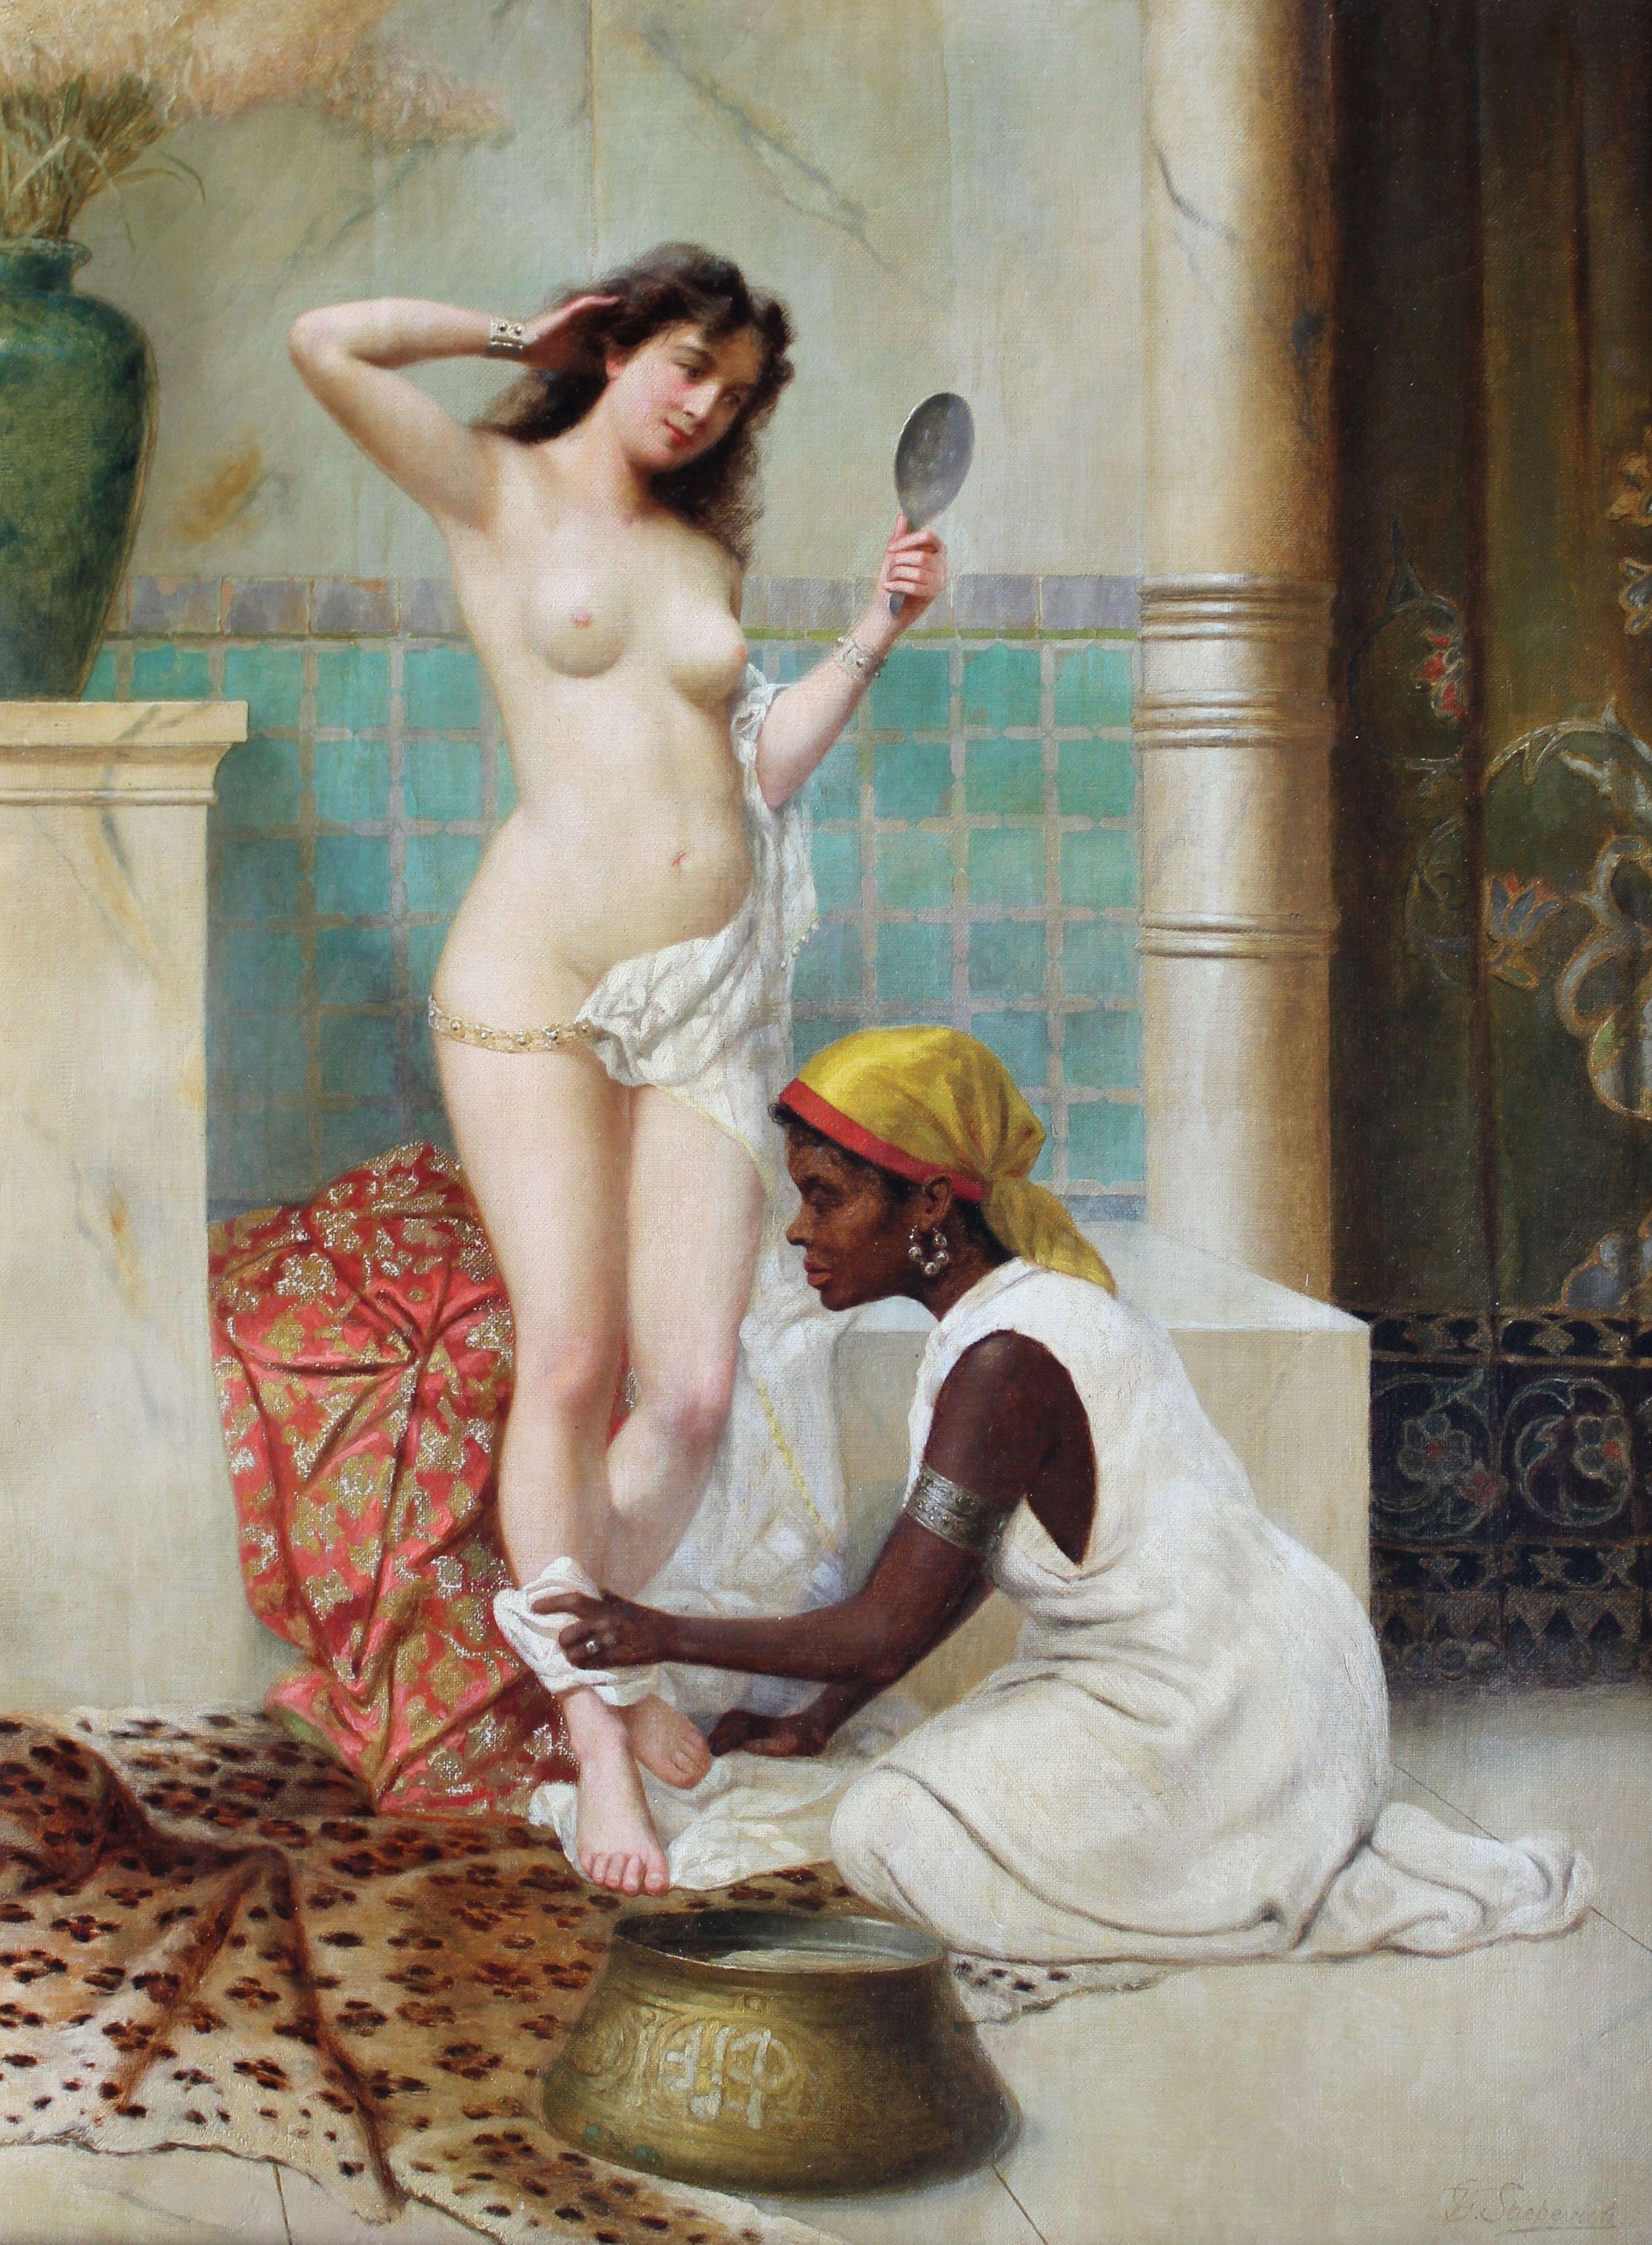 Vinsent G. Stiepevich Figurative Painting - The Bath. Late 19th Century. Oil on canvas, 61x46 сm